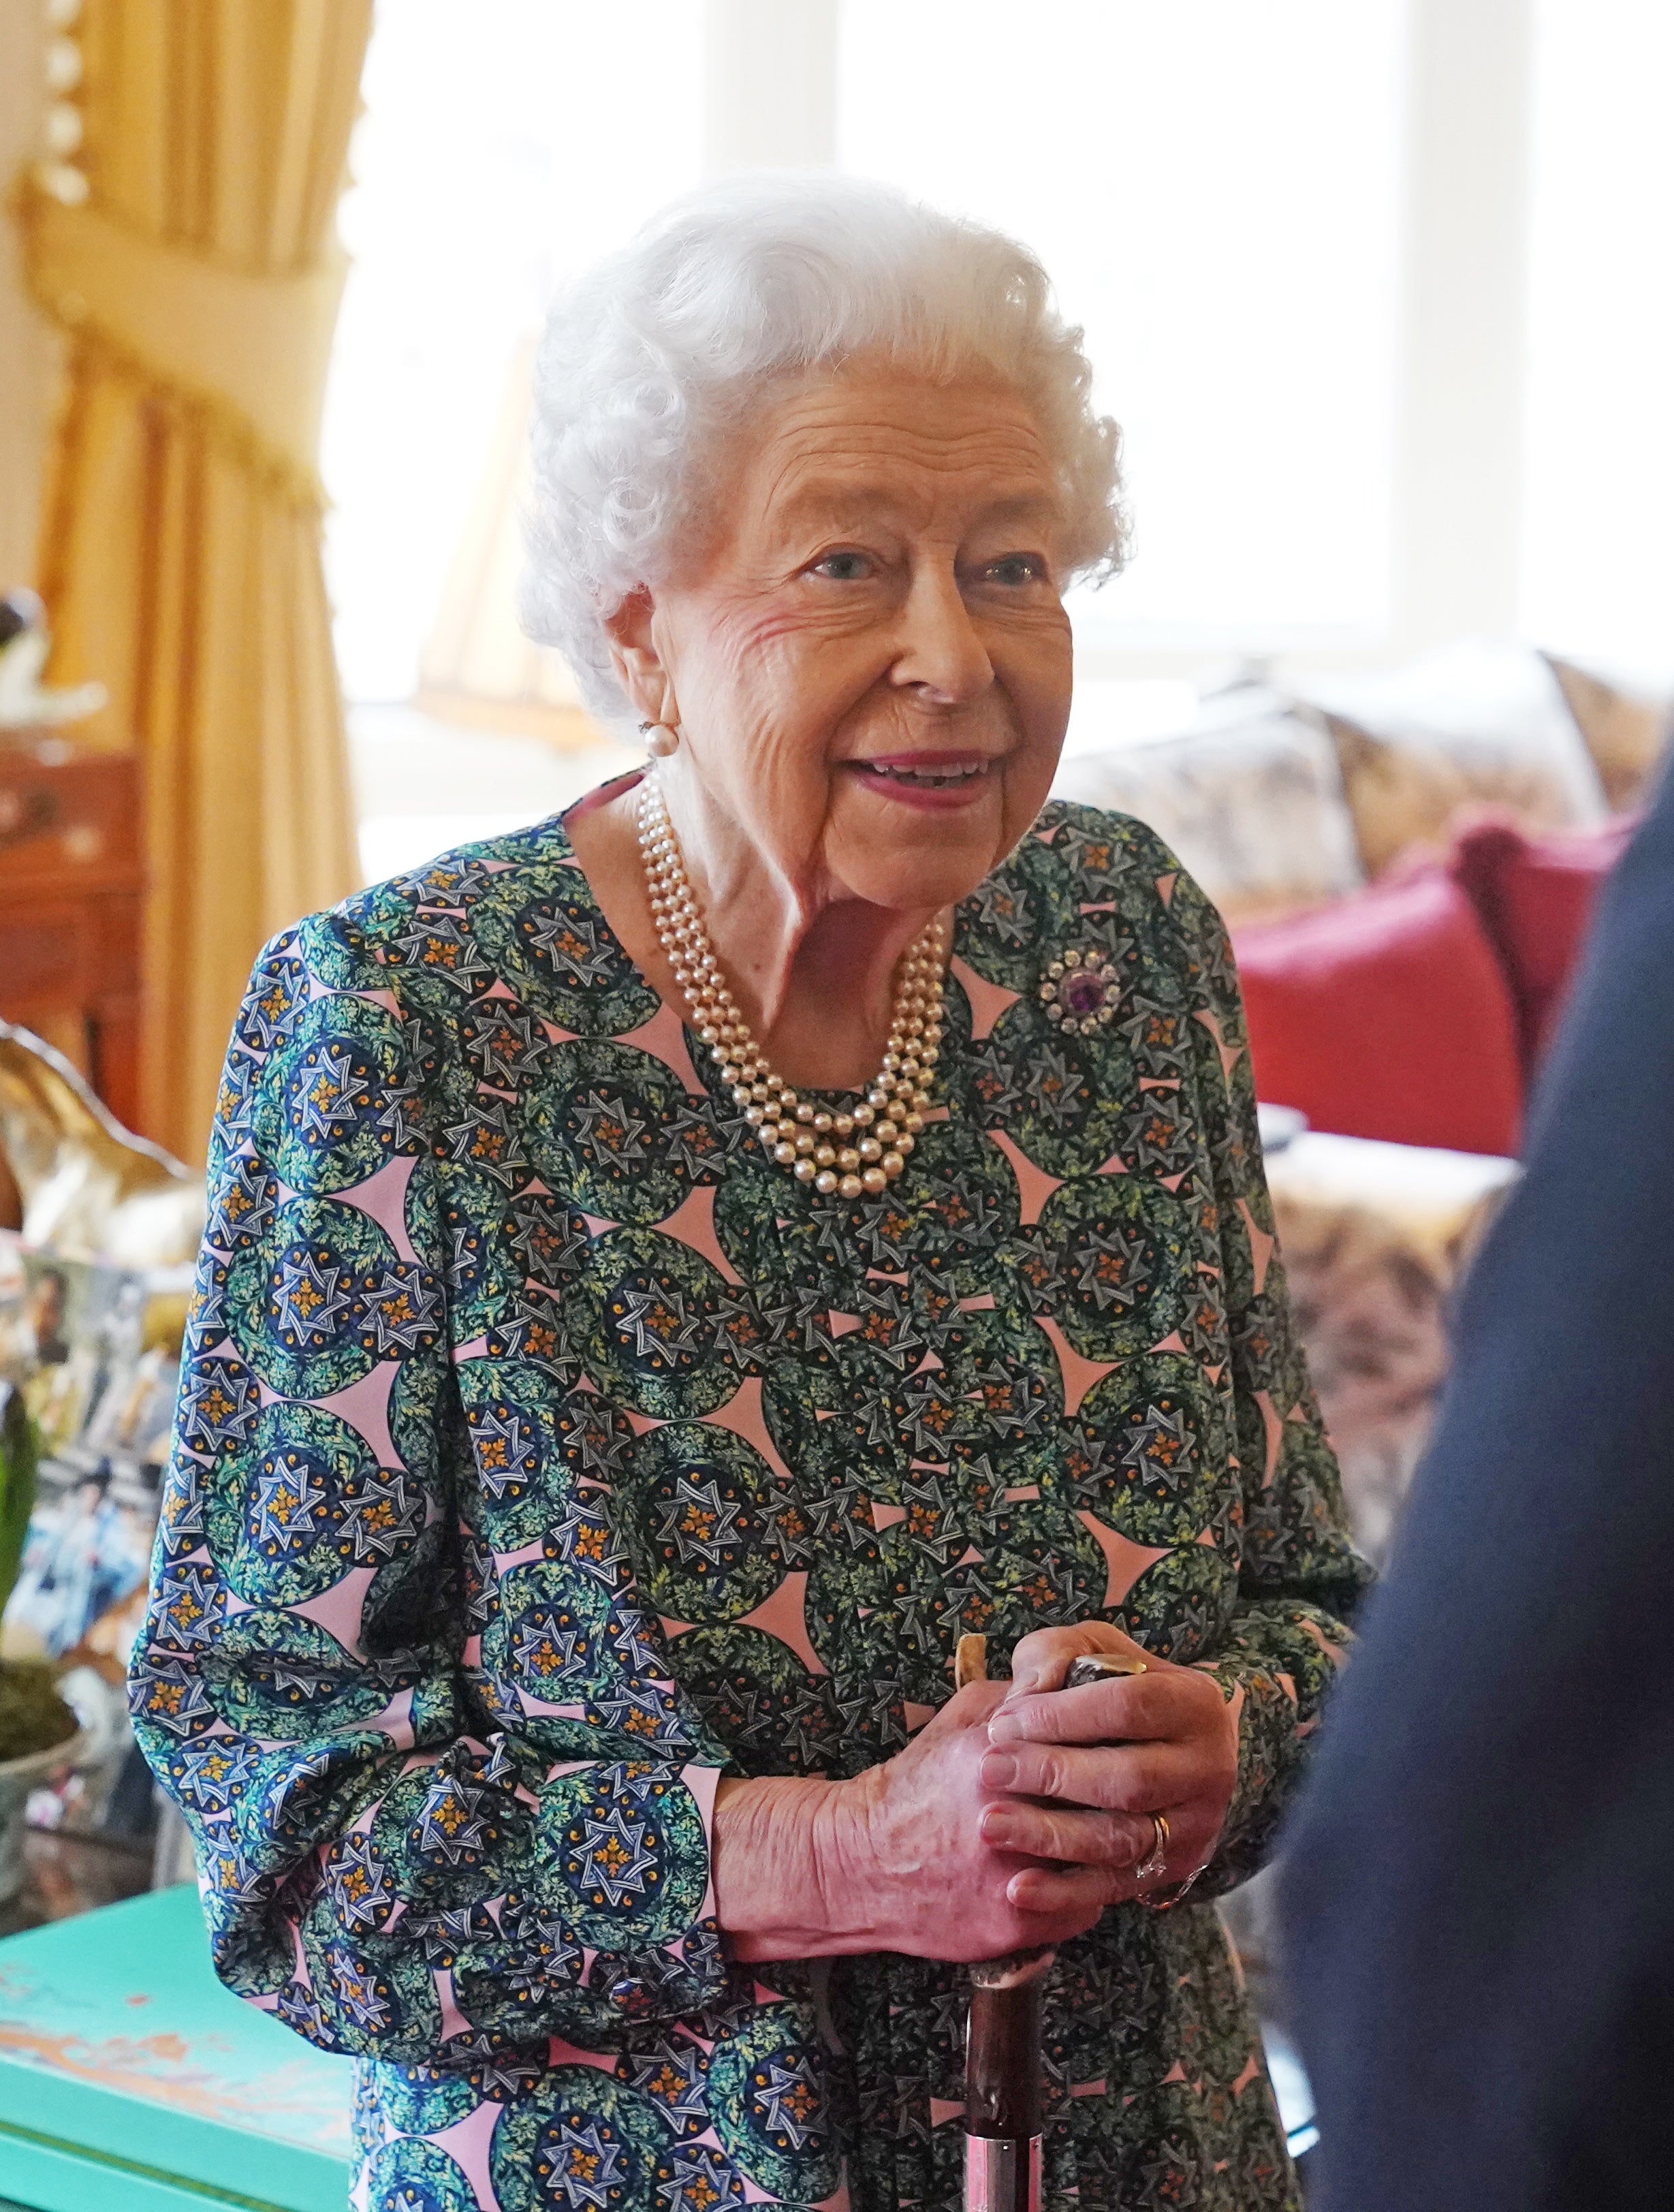 The Queen will continue with ‘light duties’ after testing positive for Covid